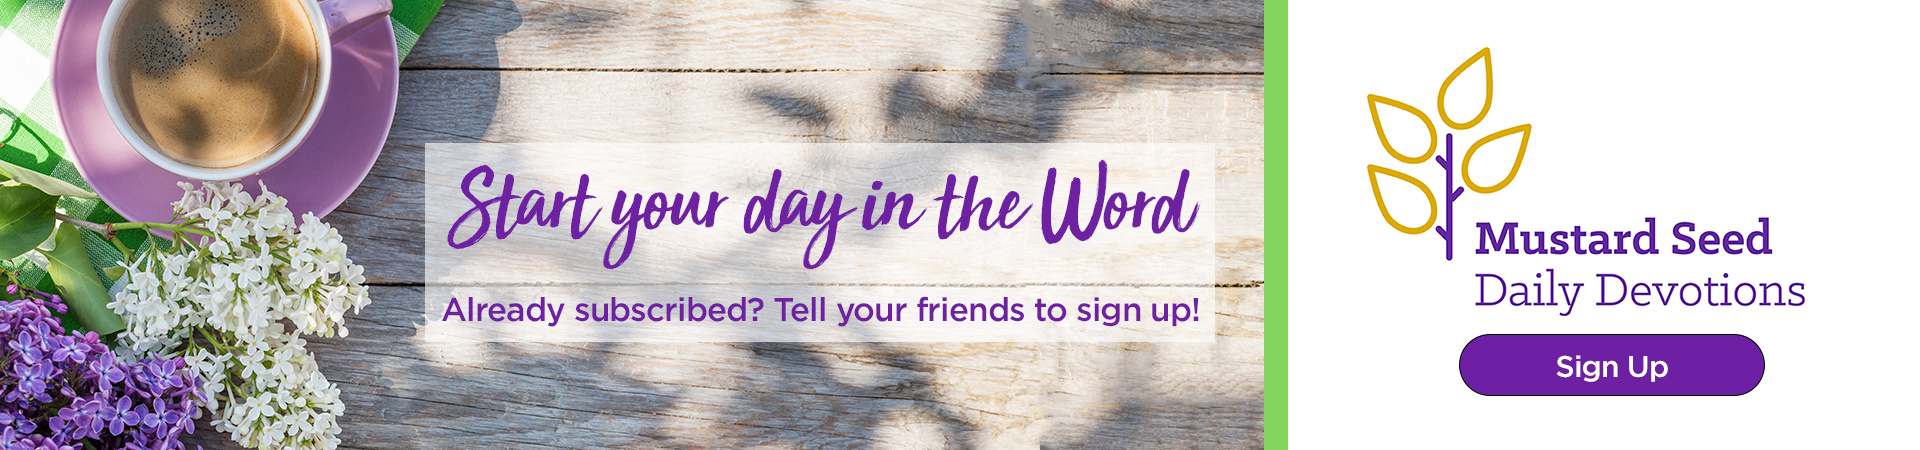 Sign up to receive daily Mustard Seed devotions in your inbox.